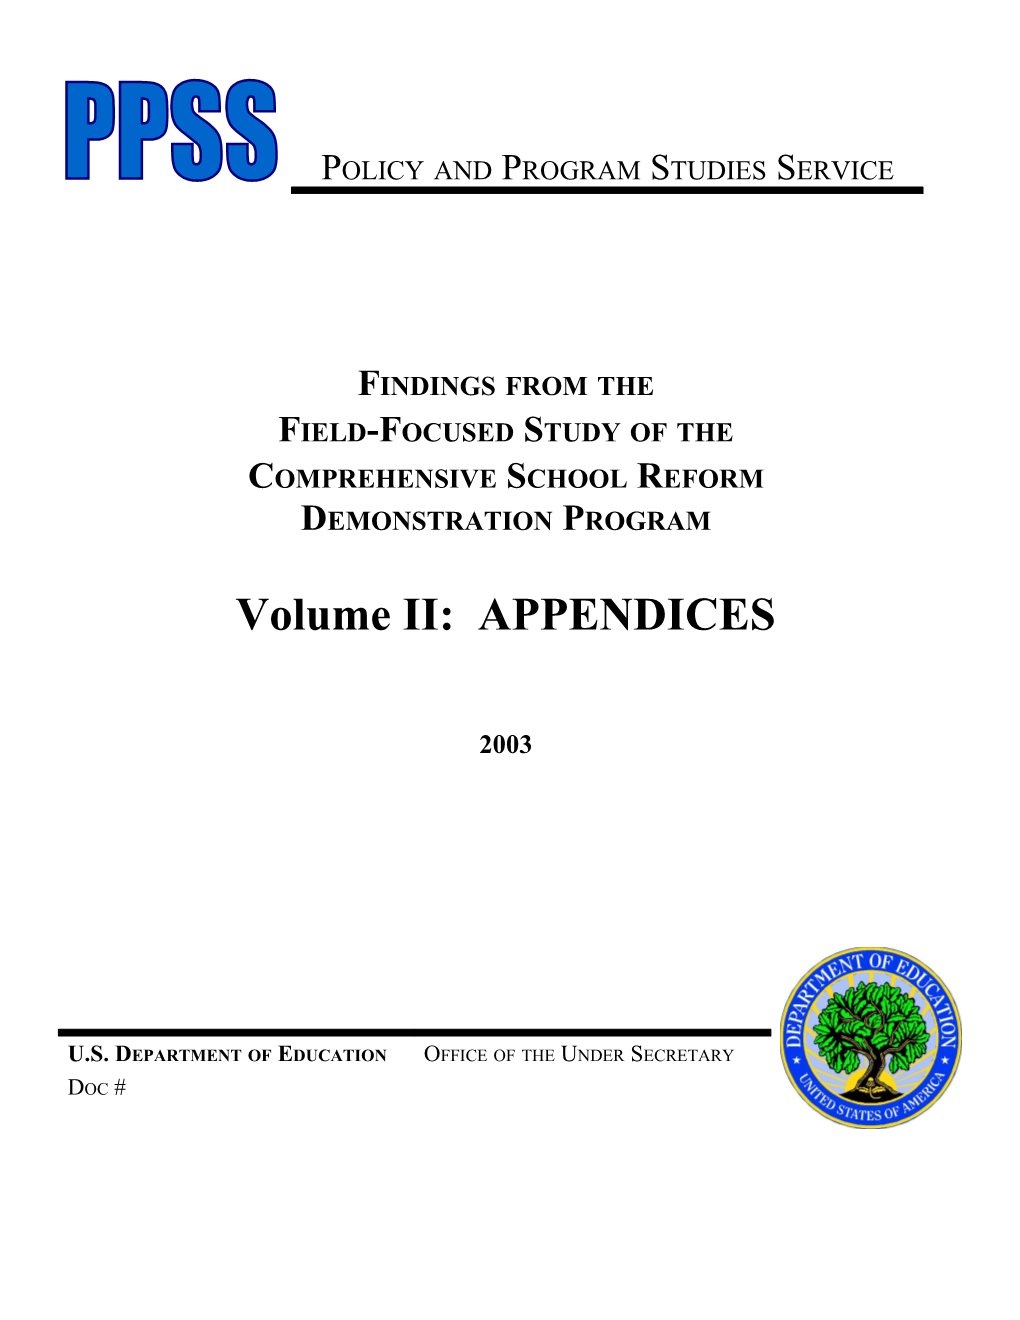 Findings from the Field-Focused Study of the Comprehensive School Reform Demonstration